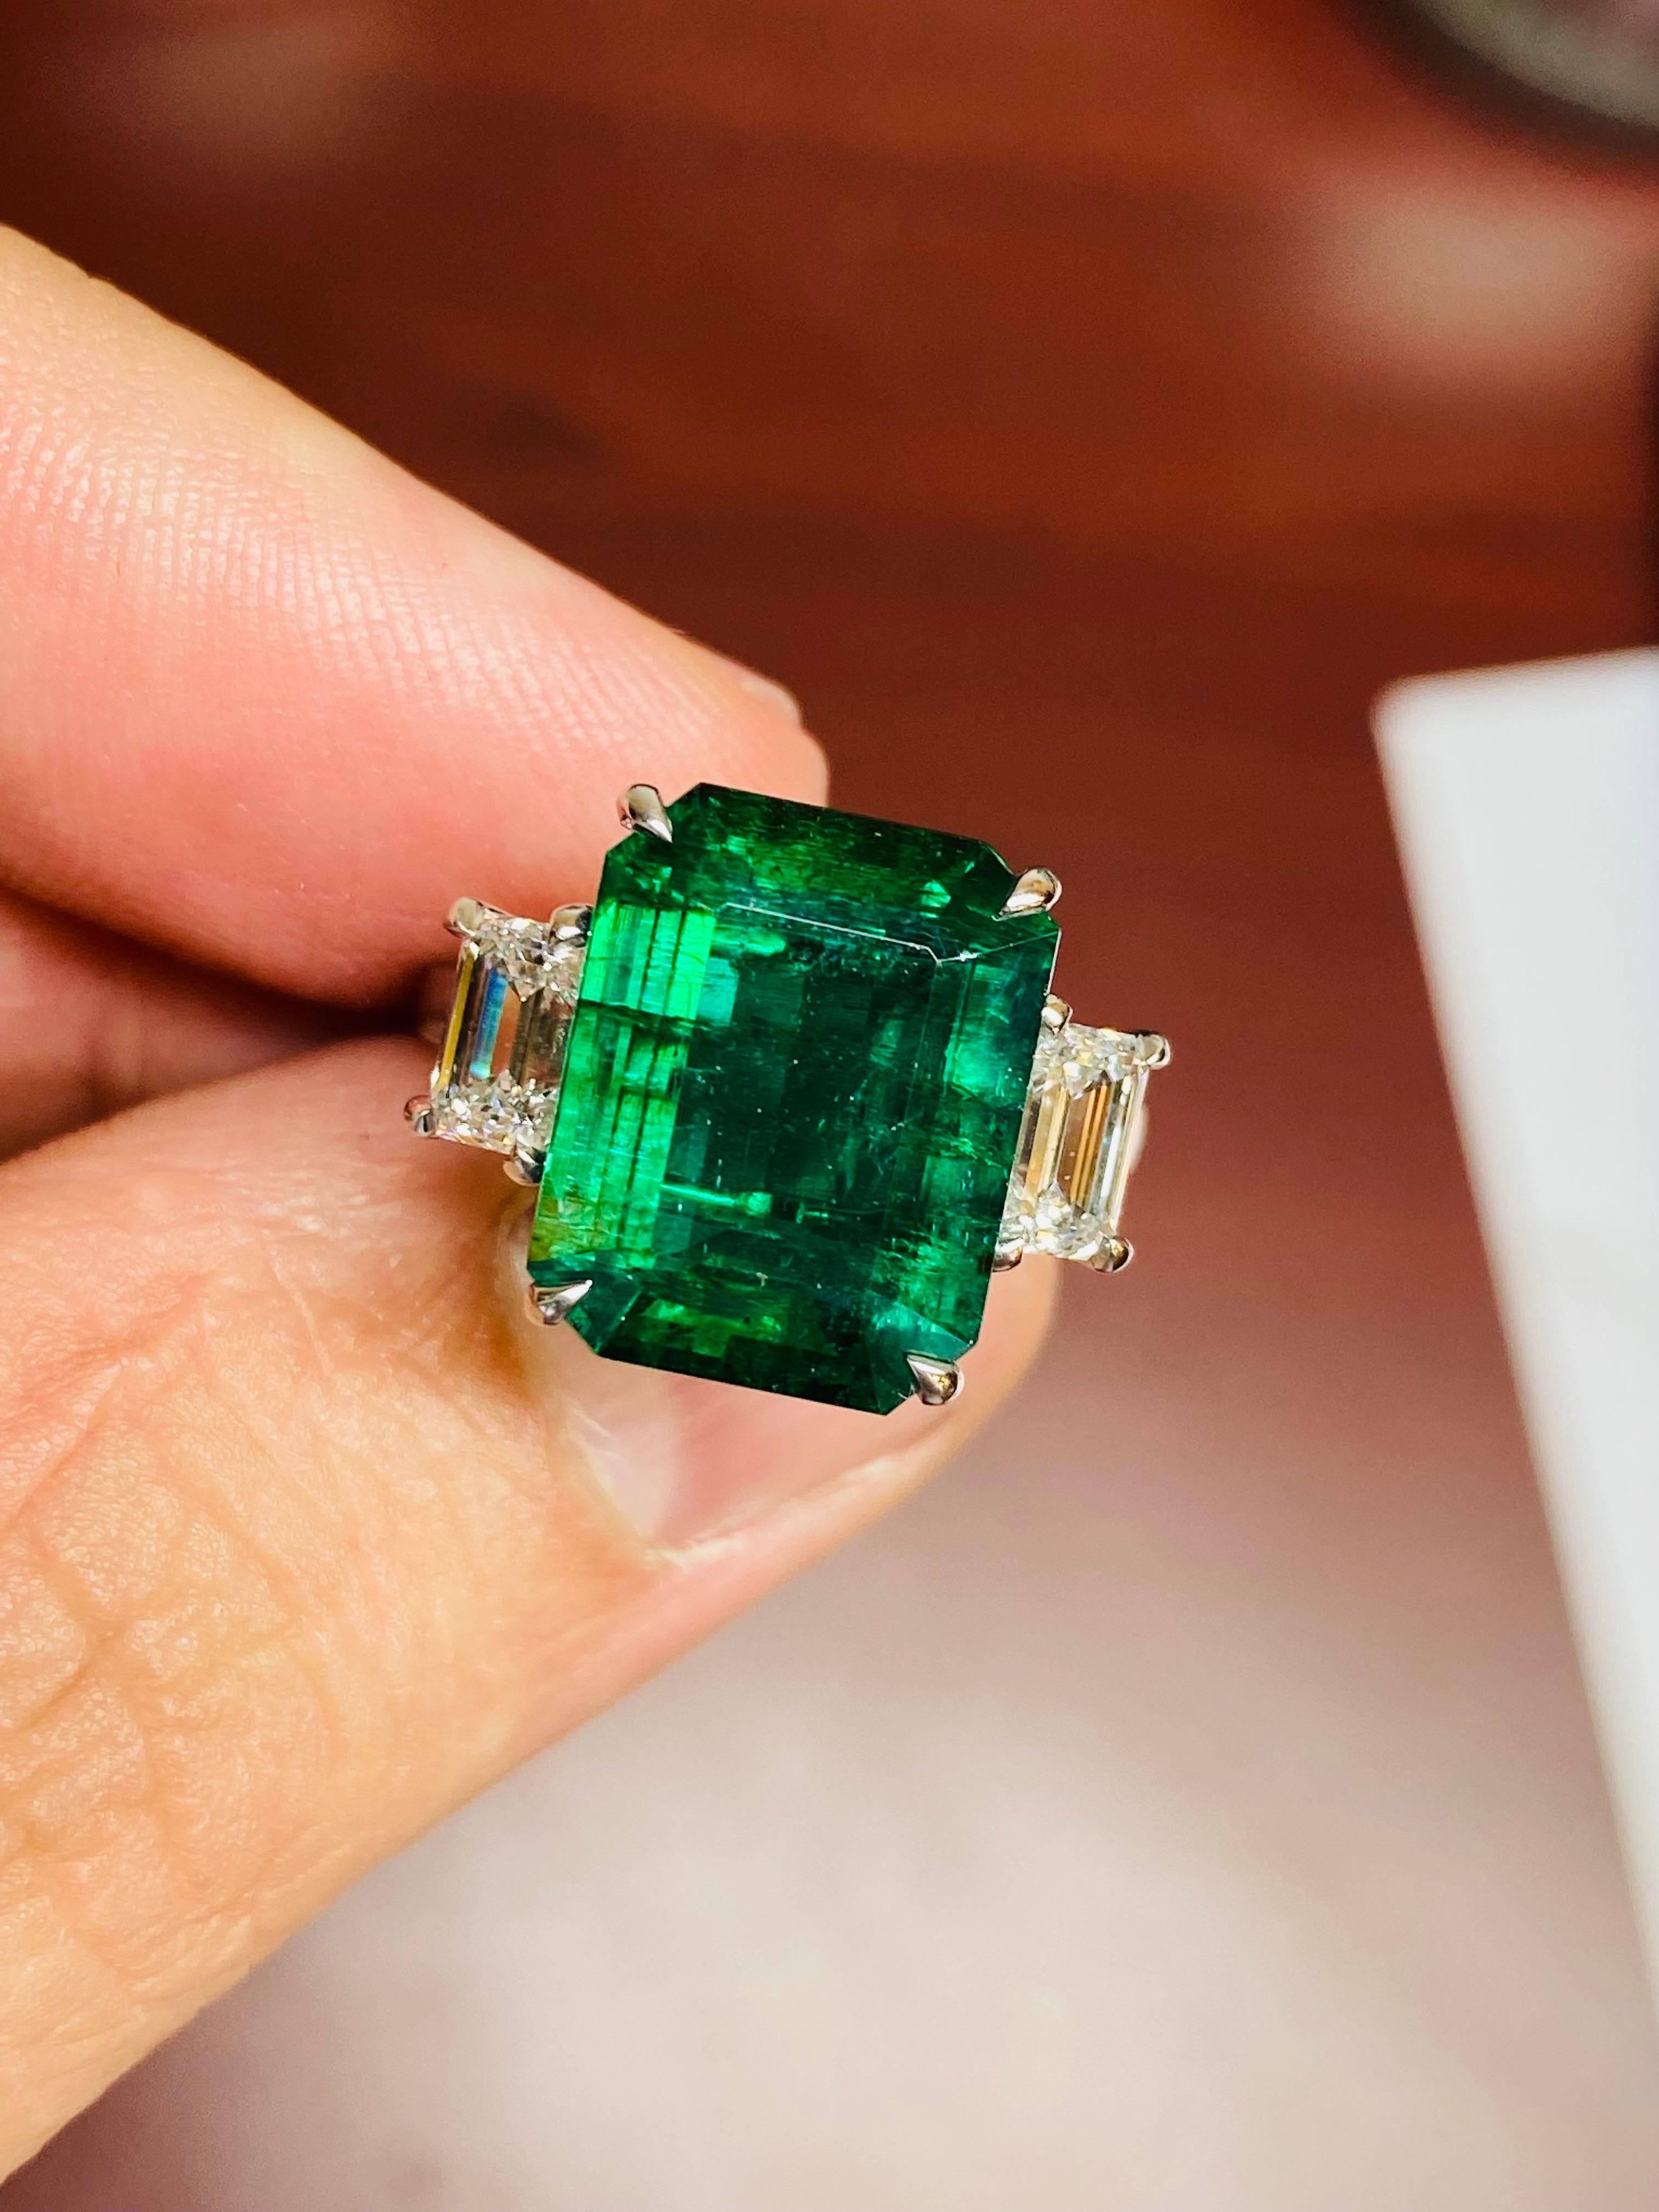 From the vault at Emilio Jewelry located on New York's iconic Fifth Avenue,
This ring has been made to wear everyday and also be worn as an astonishing engagement ring. The custom mounting has been made to sit super low on the finger, set in